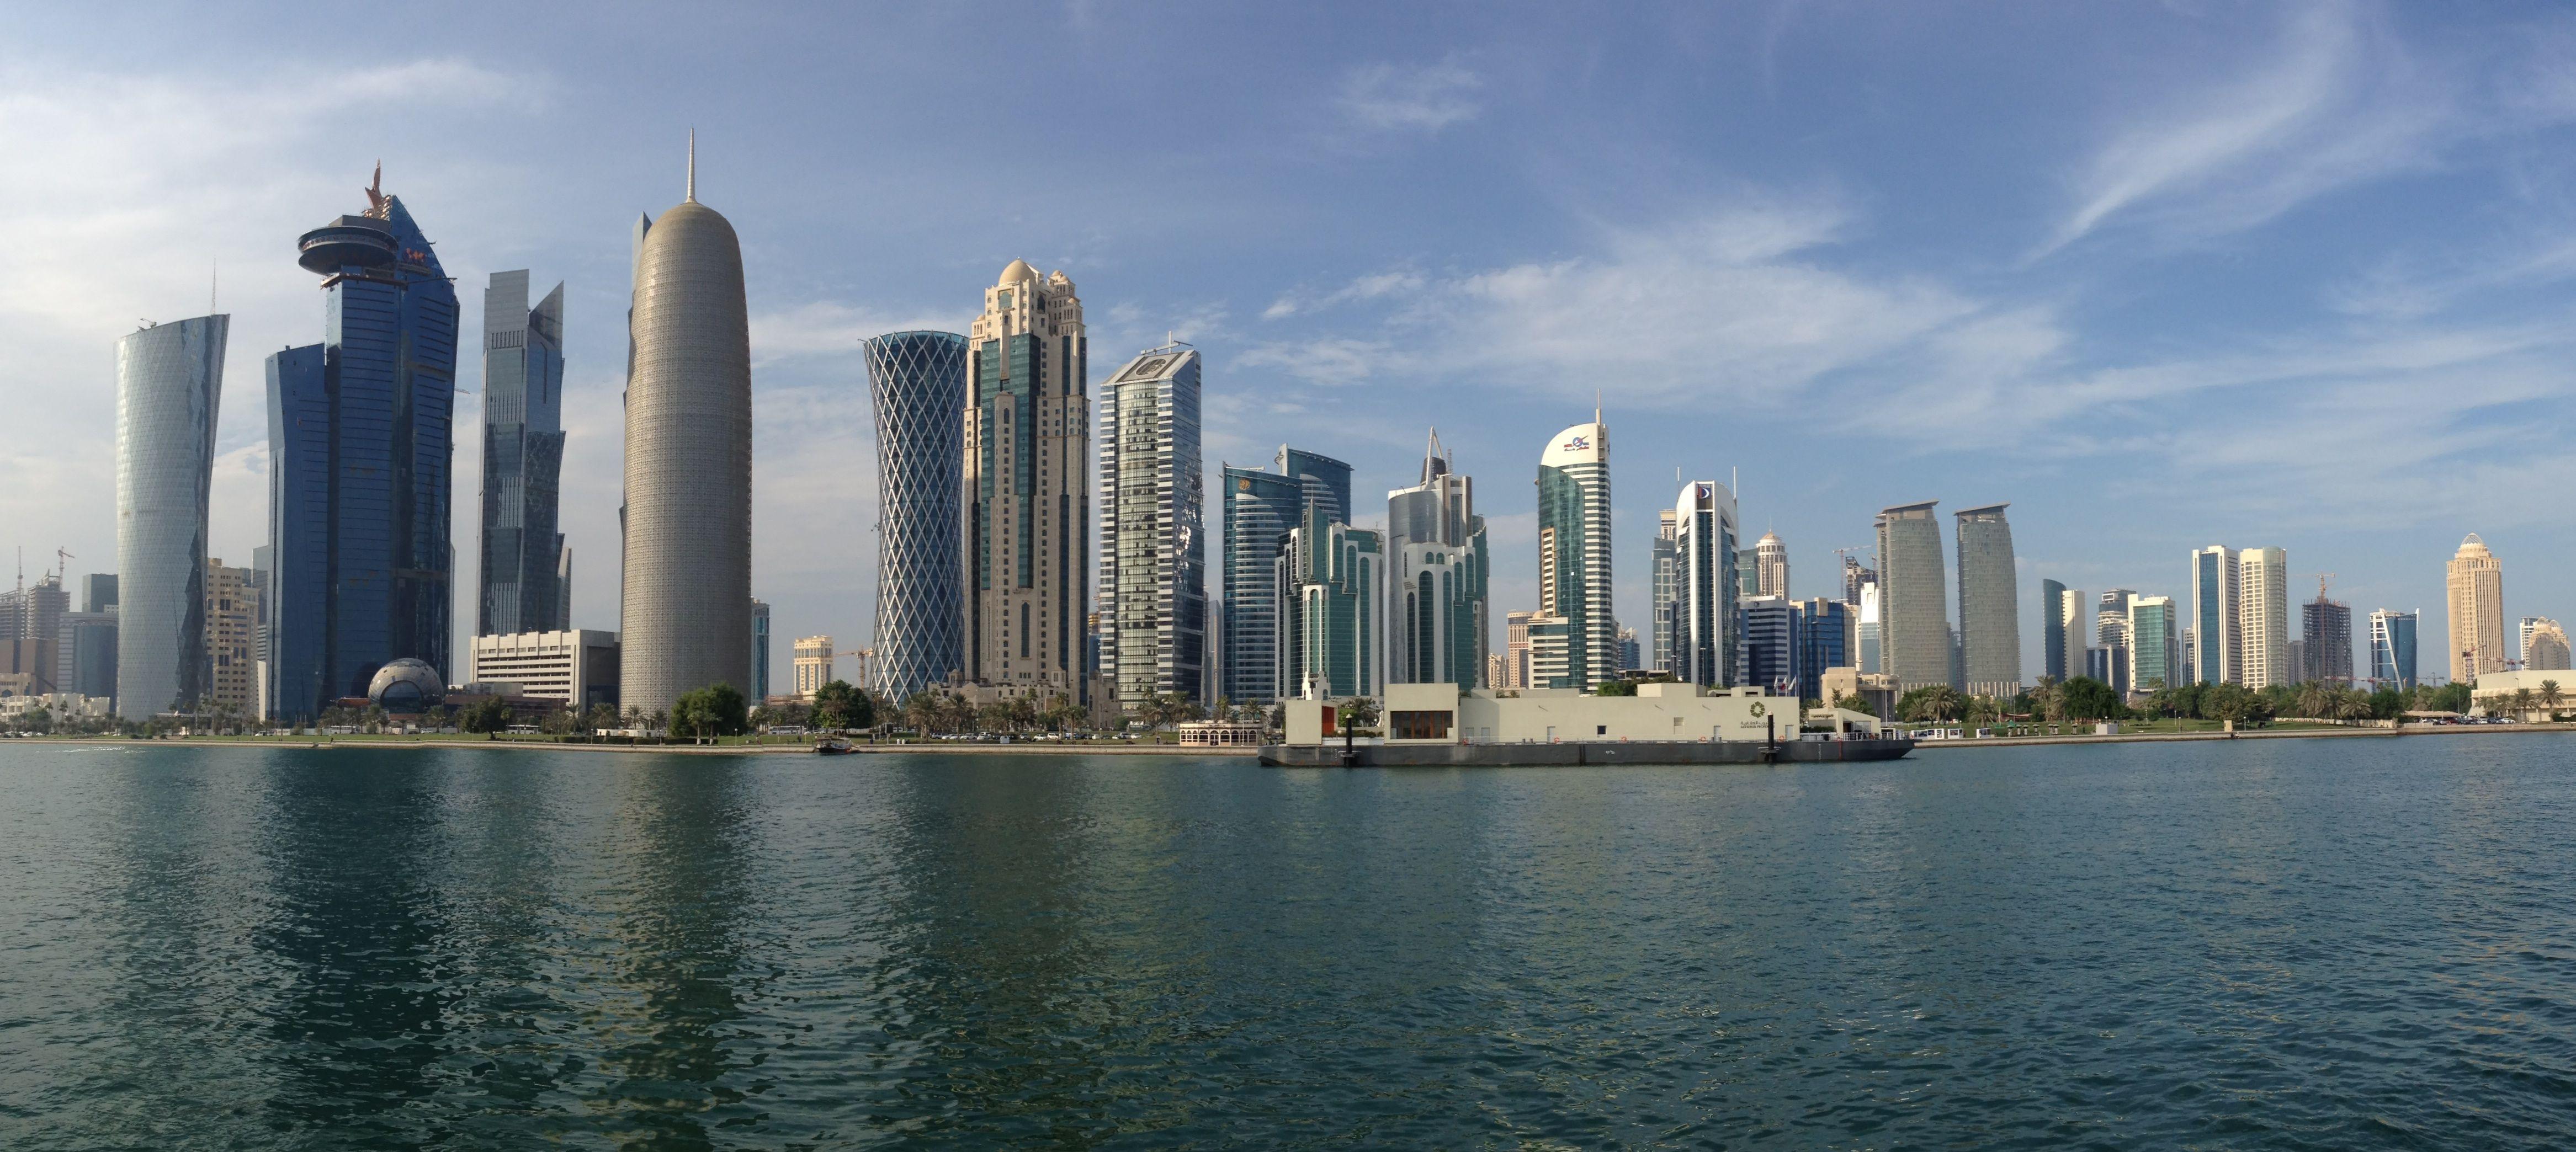 Awesome Doha HD Wallpaper Free Download